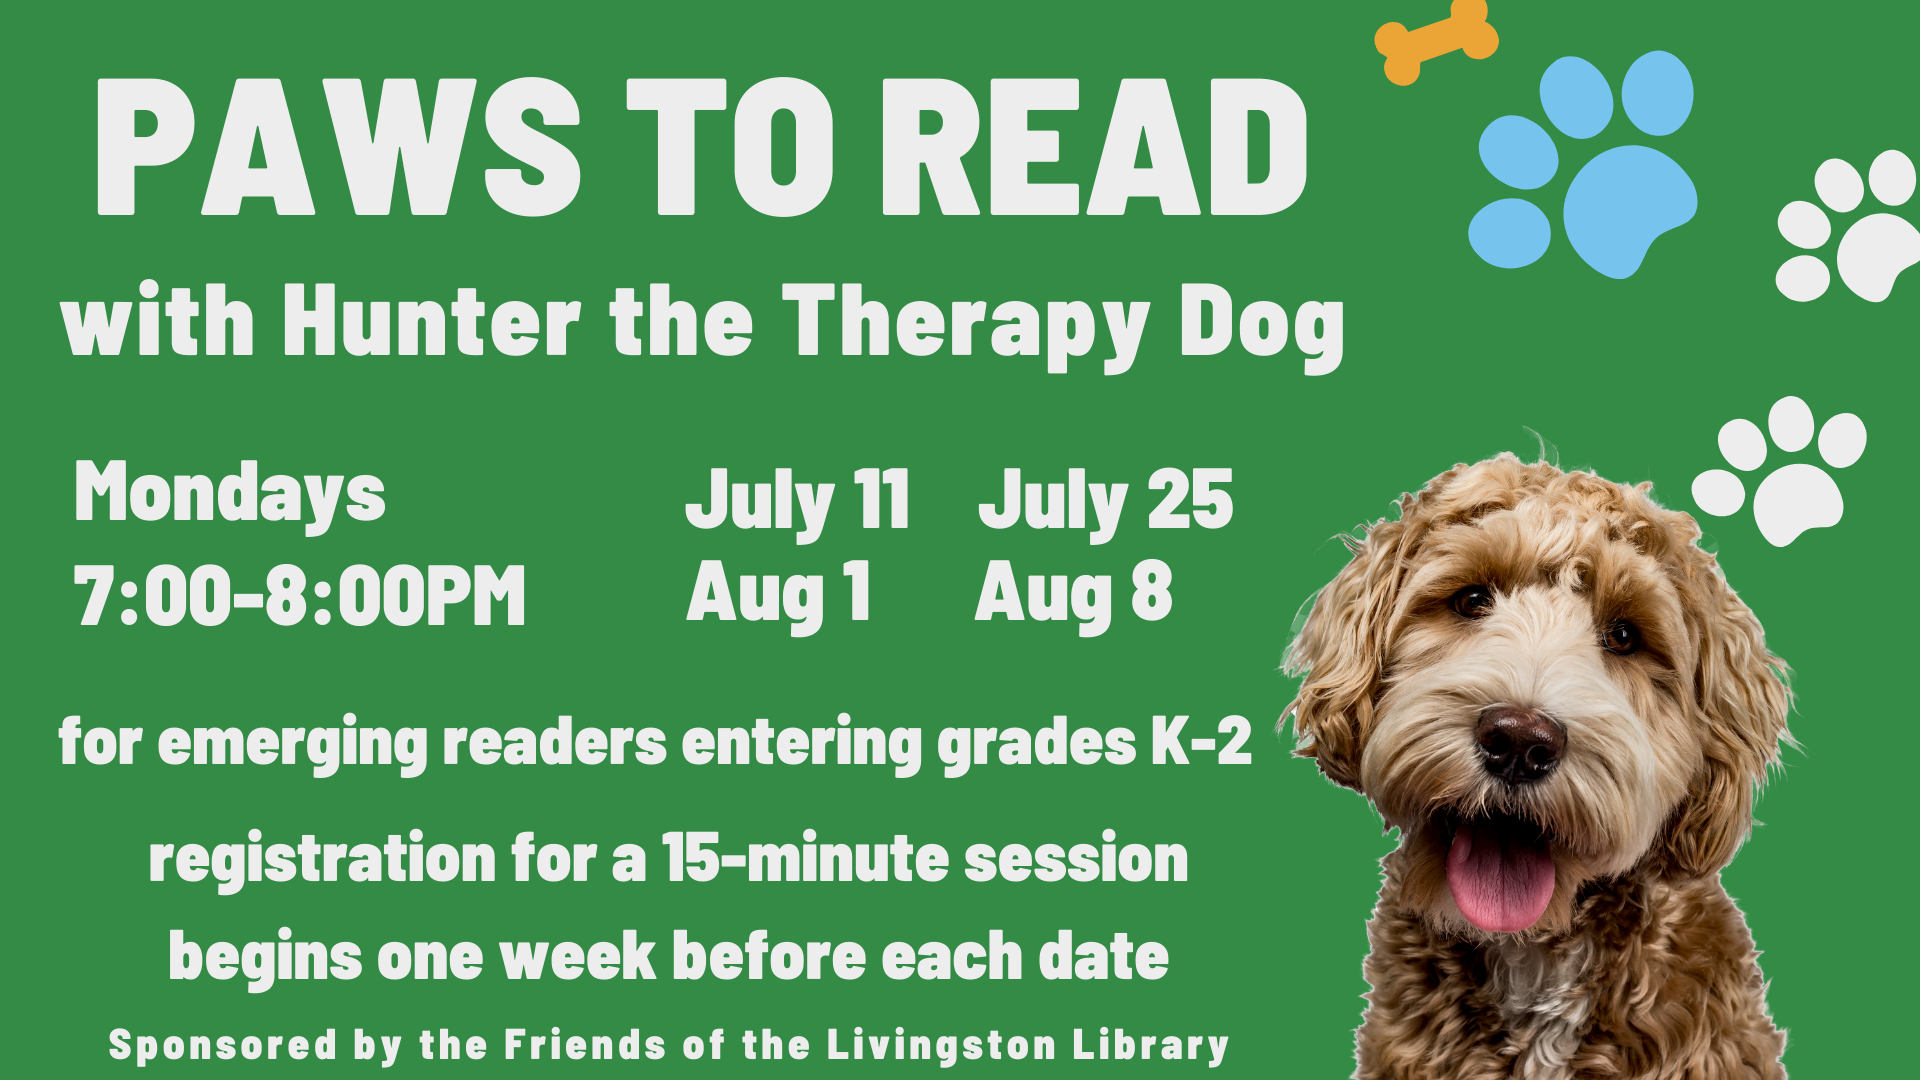 paws to read with hunter the therapy dog, with a picture of a golden doodle dog on a green background